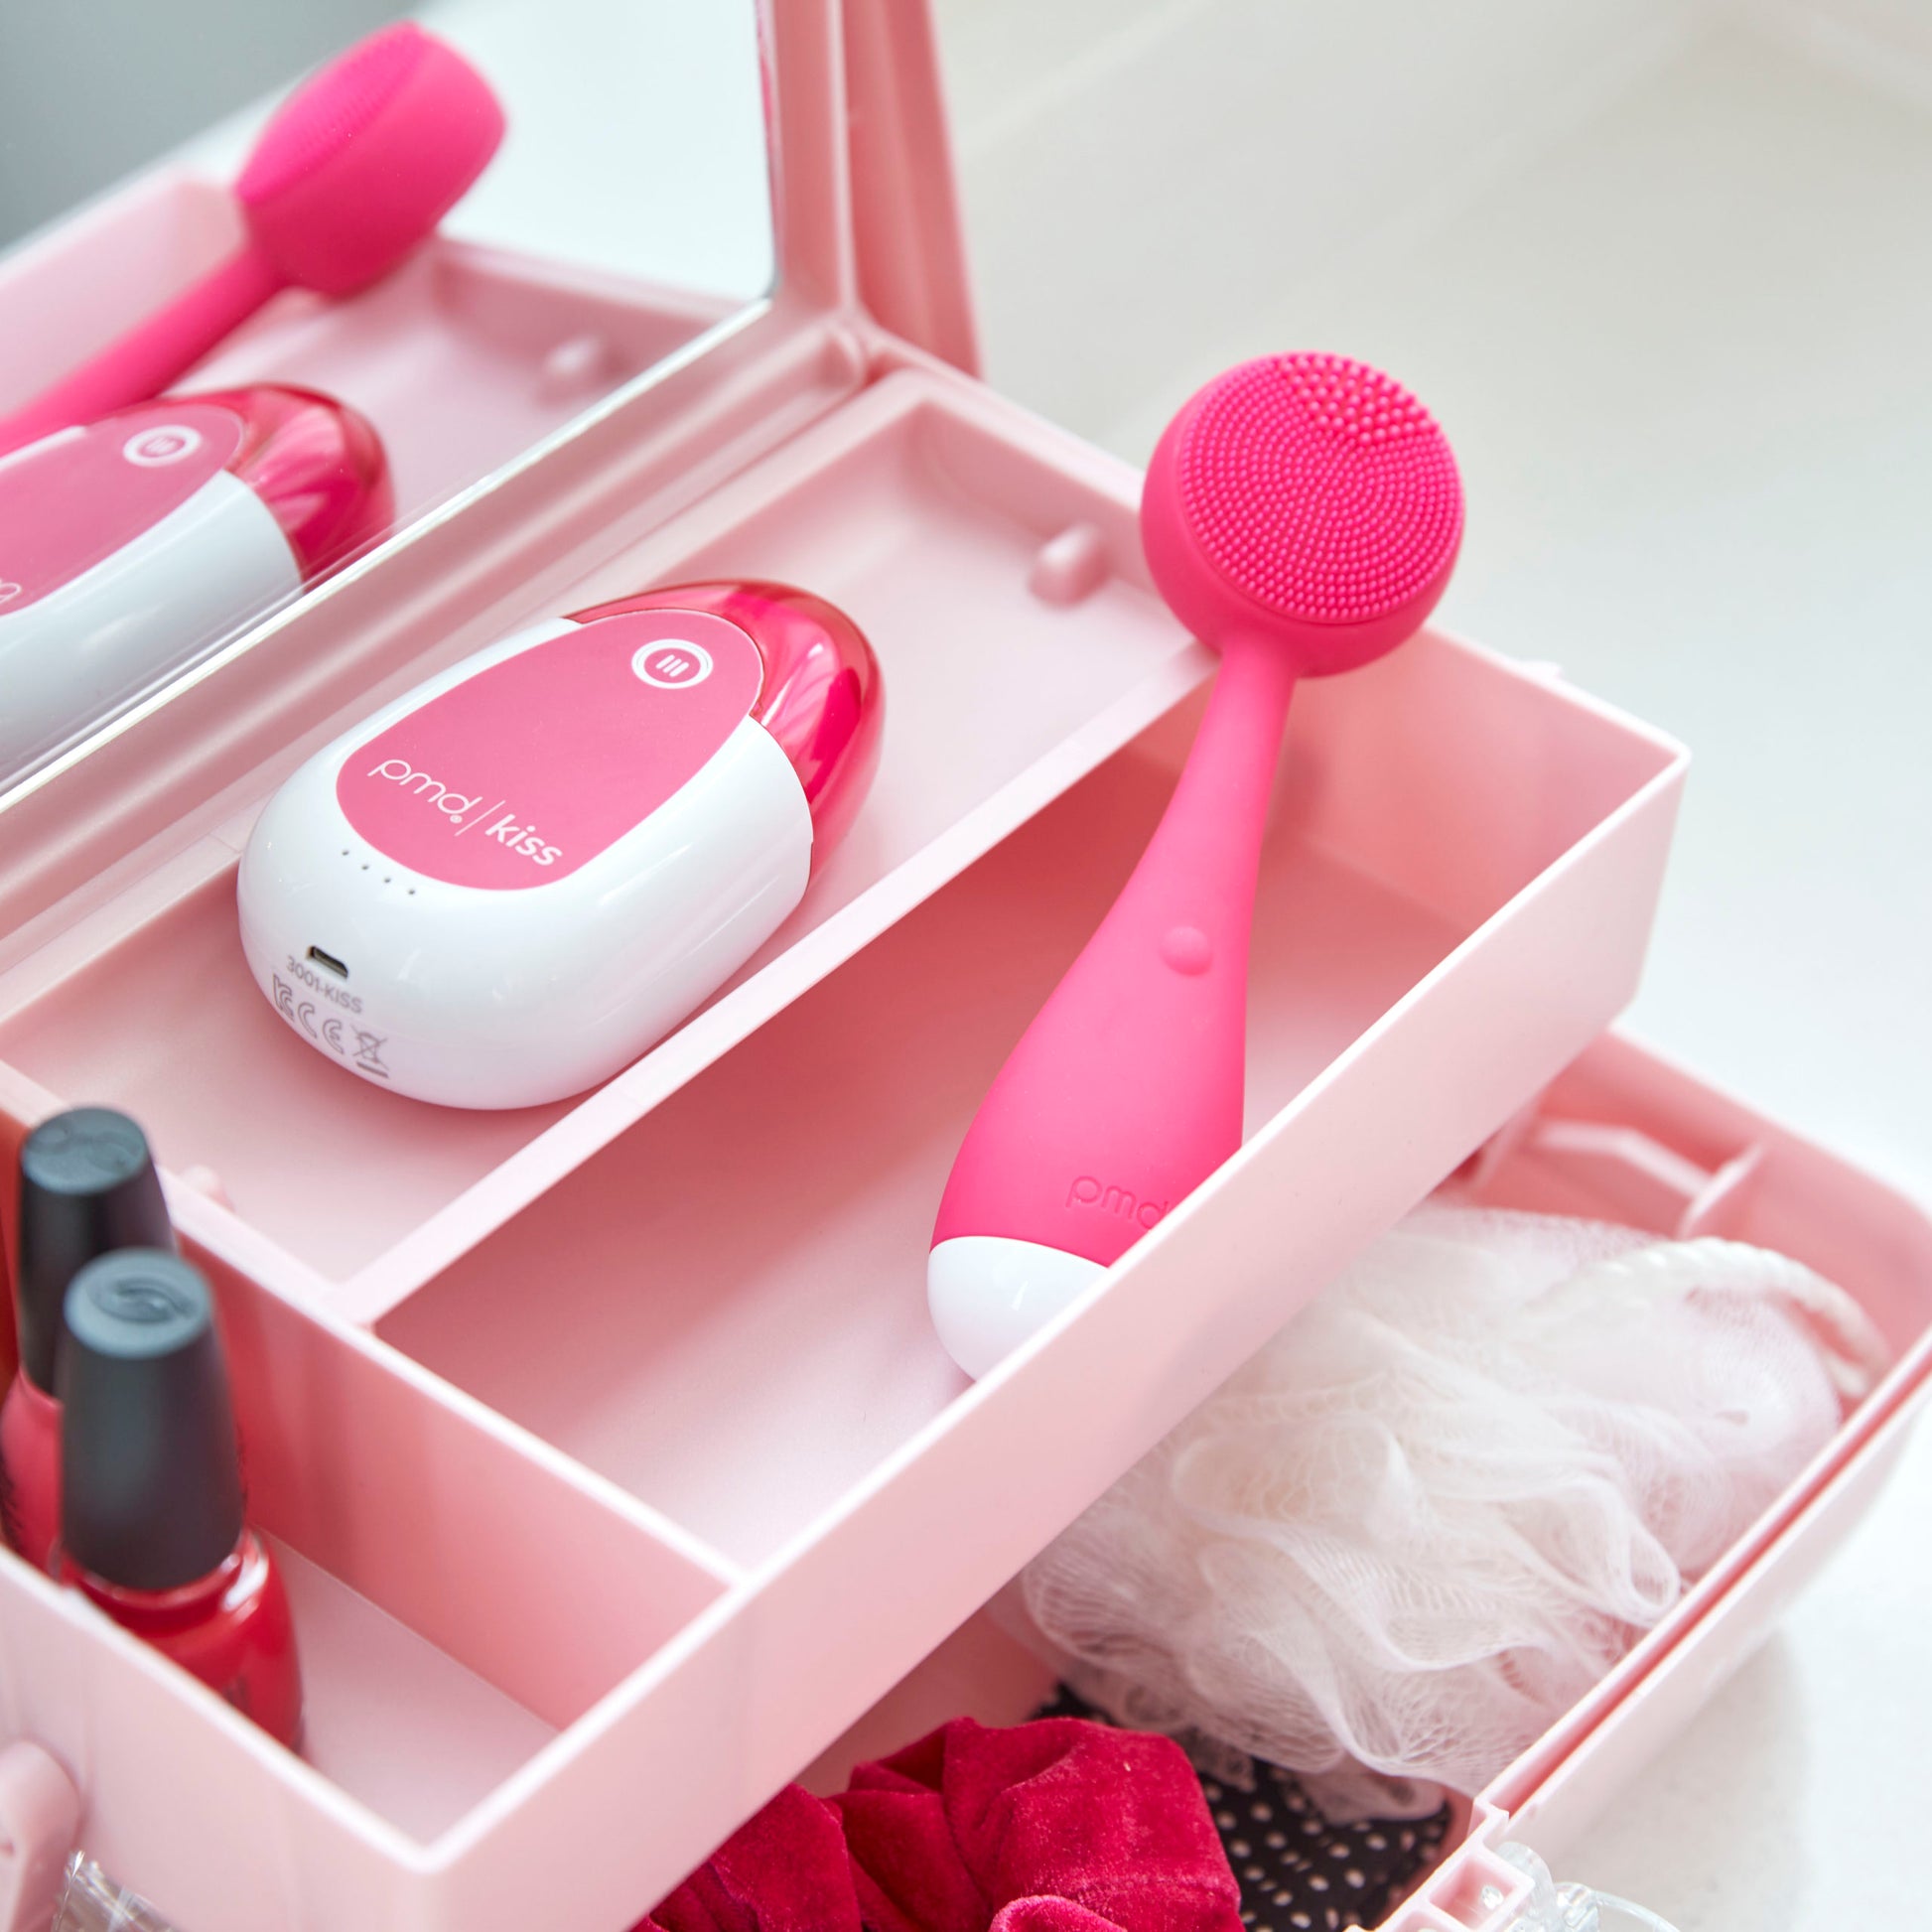 13 Facts About Caboodles Makeup Organizers